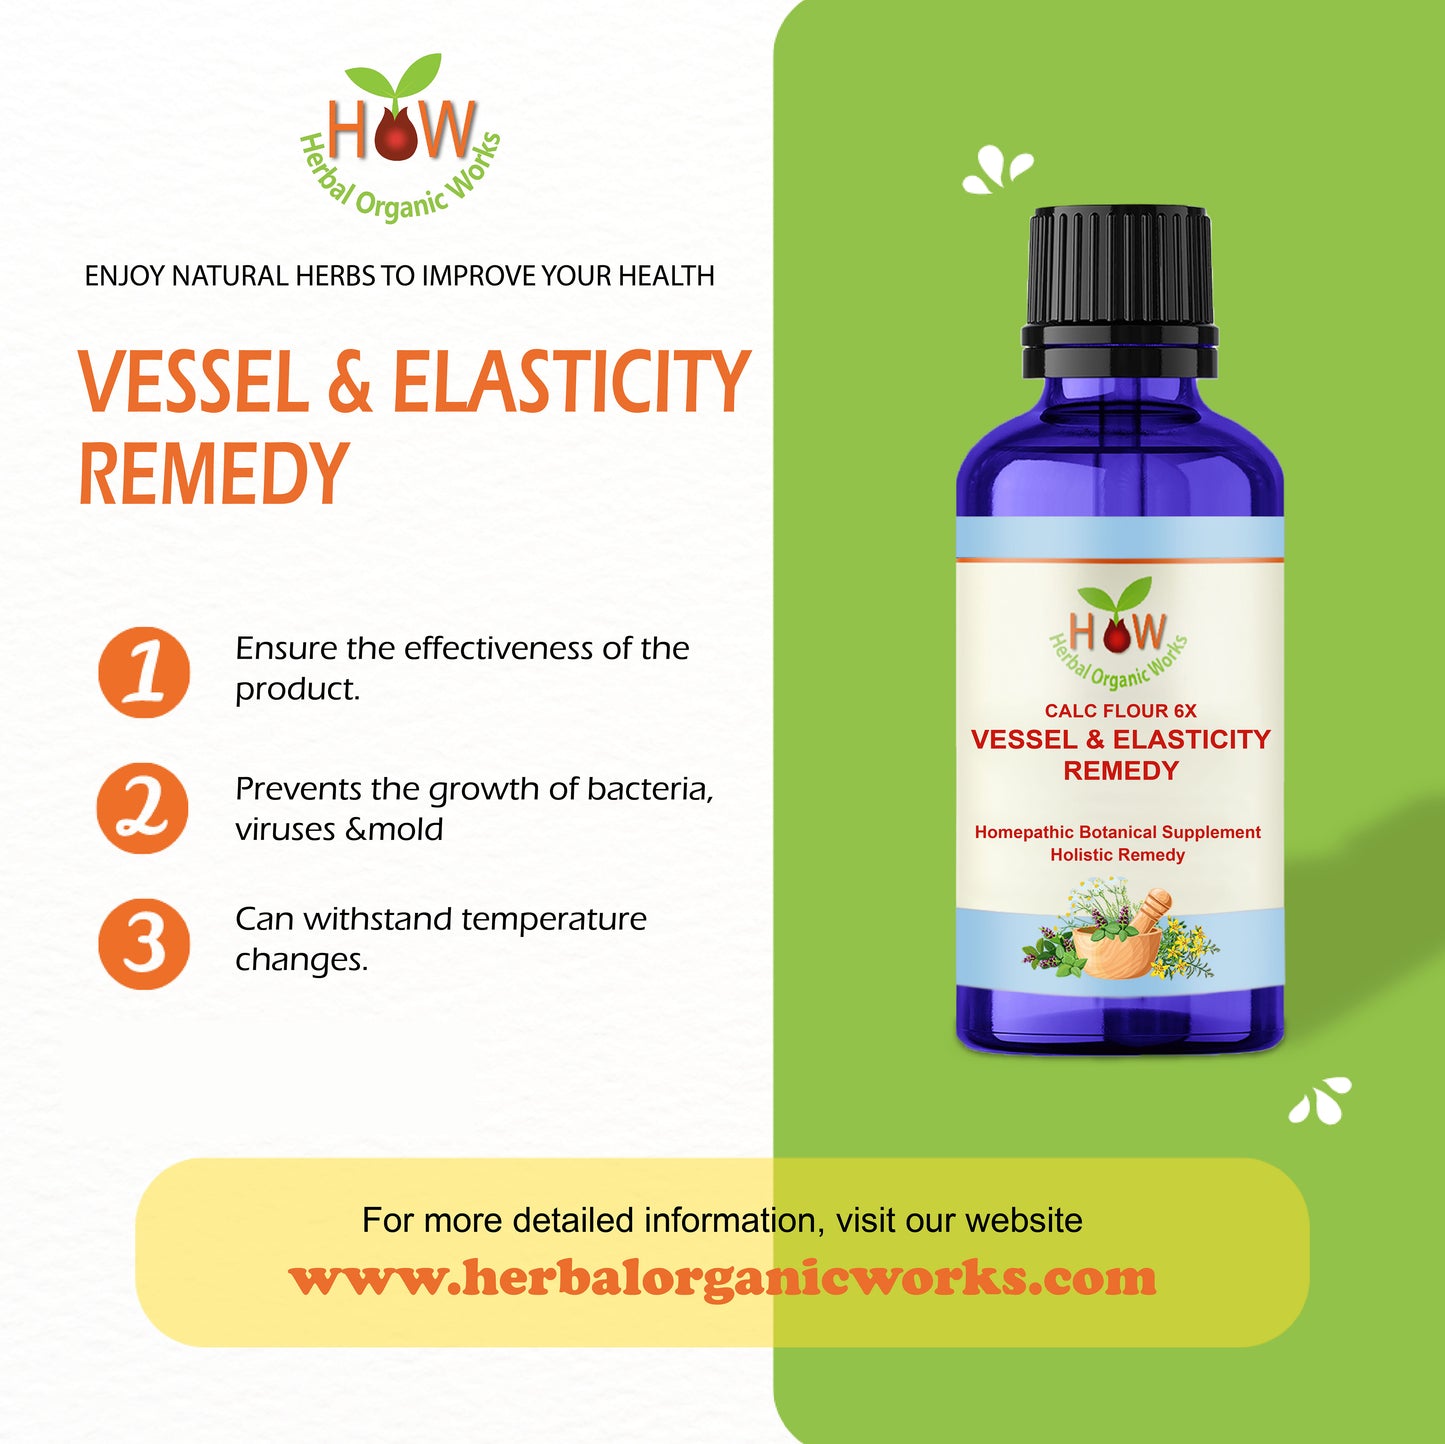 VESSELS AND ELASTICITY REMEDY